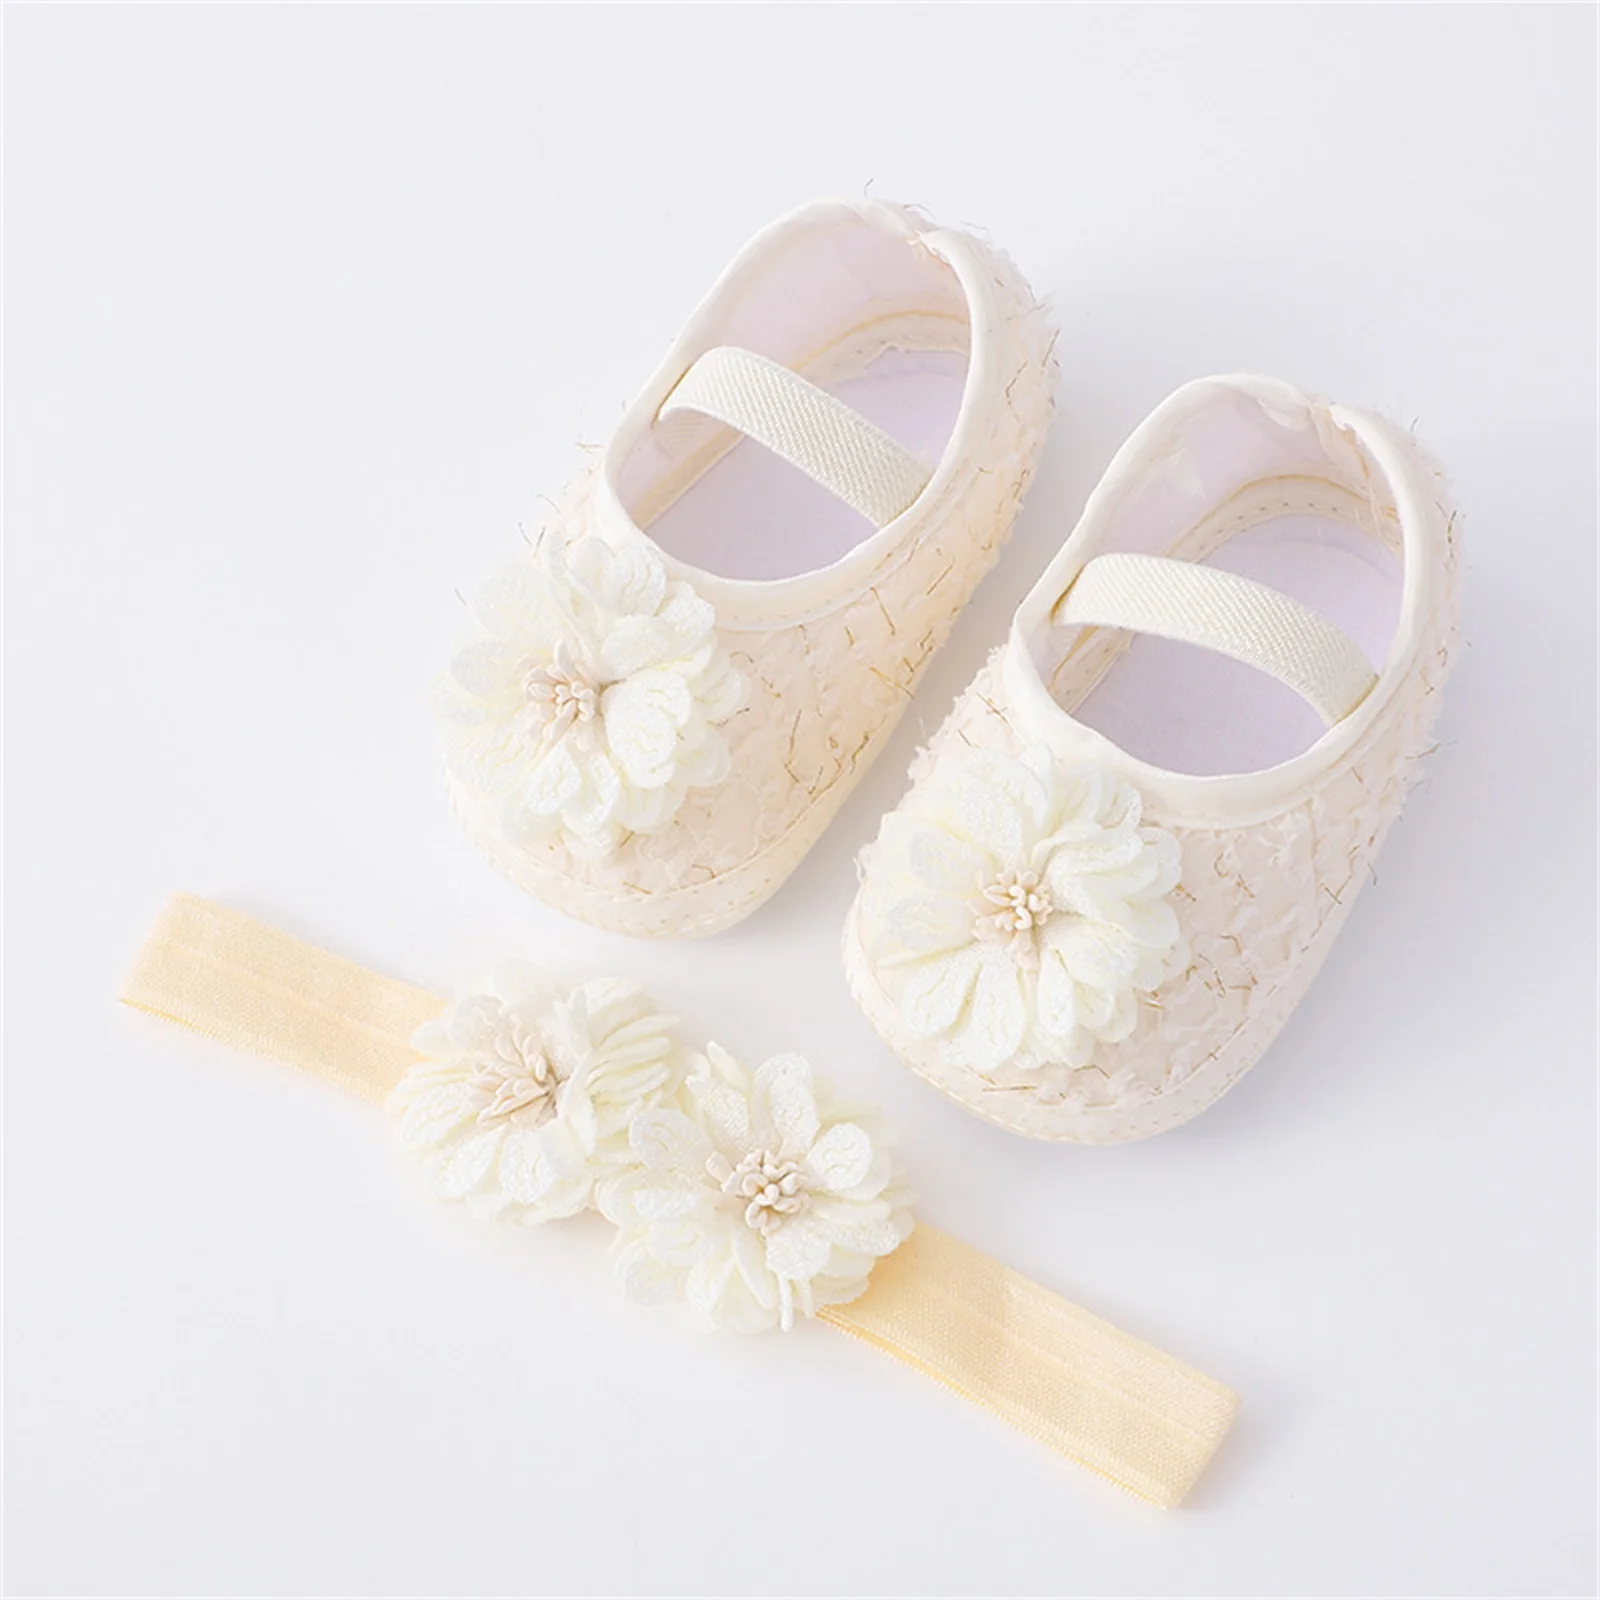 

EWODOS Toddler Baby Girls Flat Shoes Set Babies Crib Shoes Soft Sole Flower Elastic Band Non-slip Toddler Shoes with Hairband